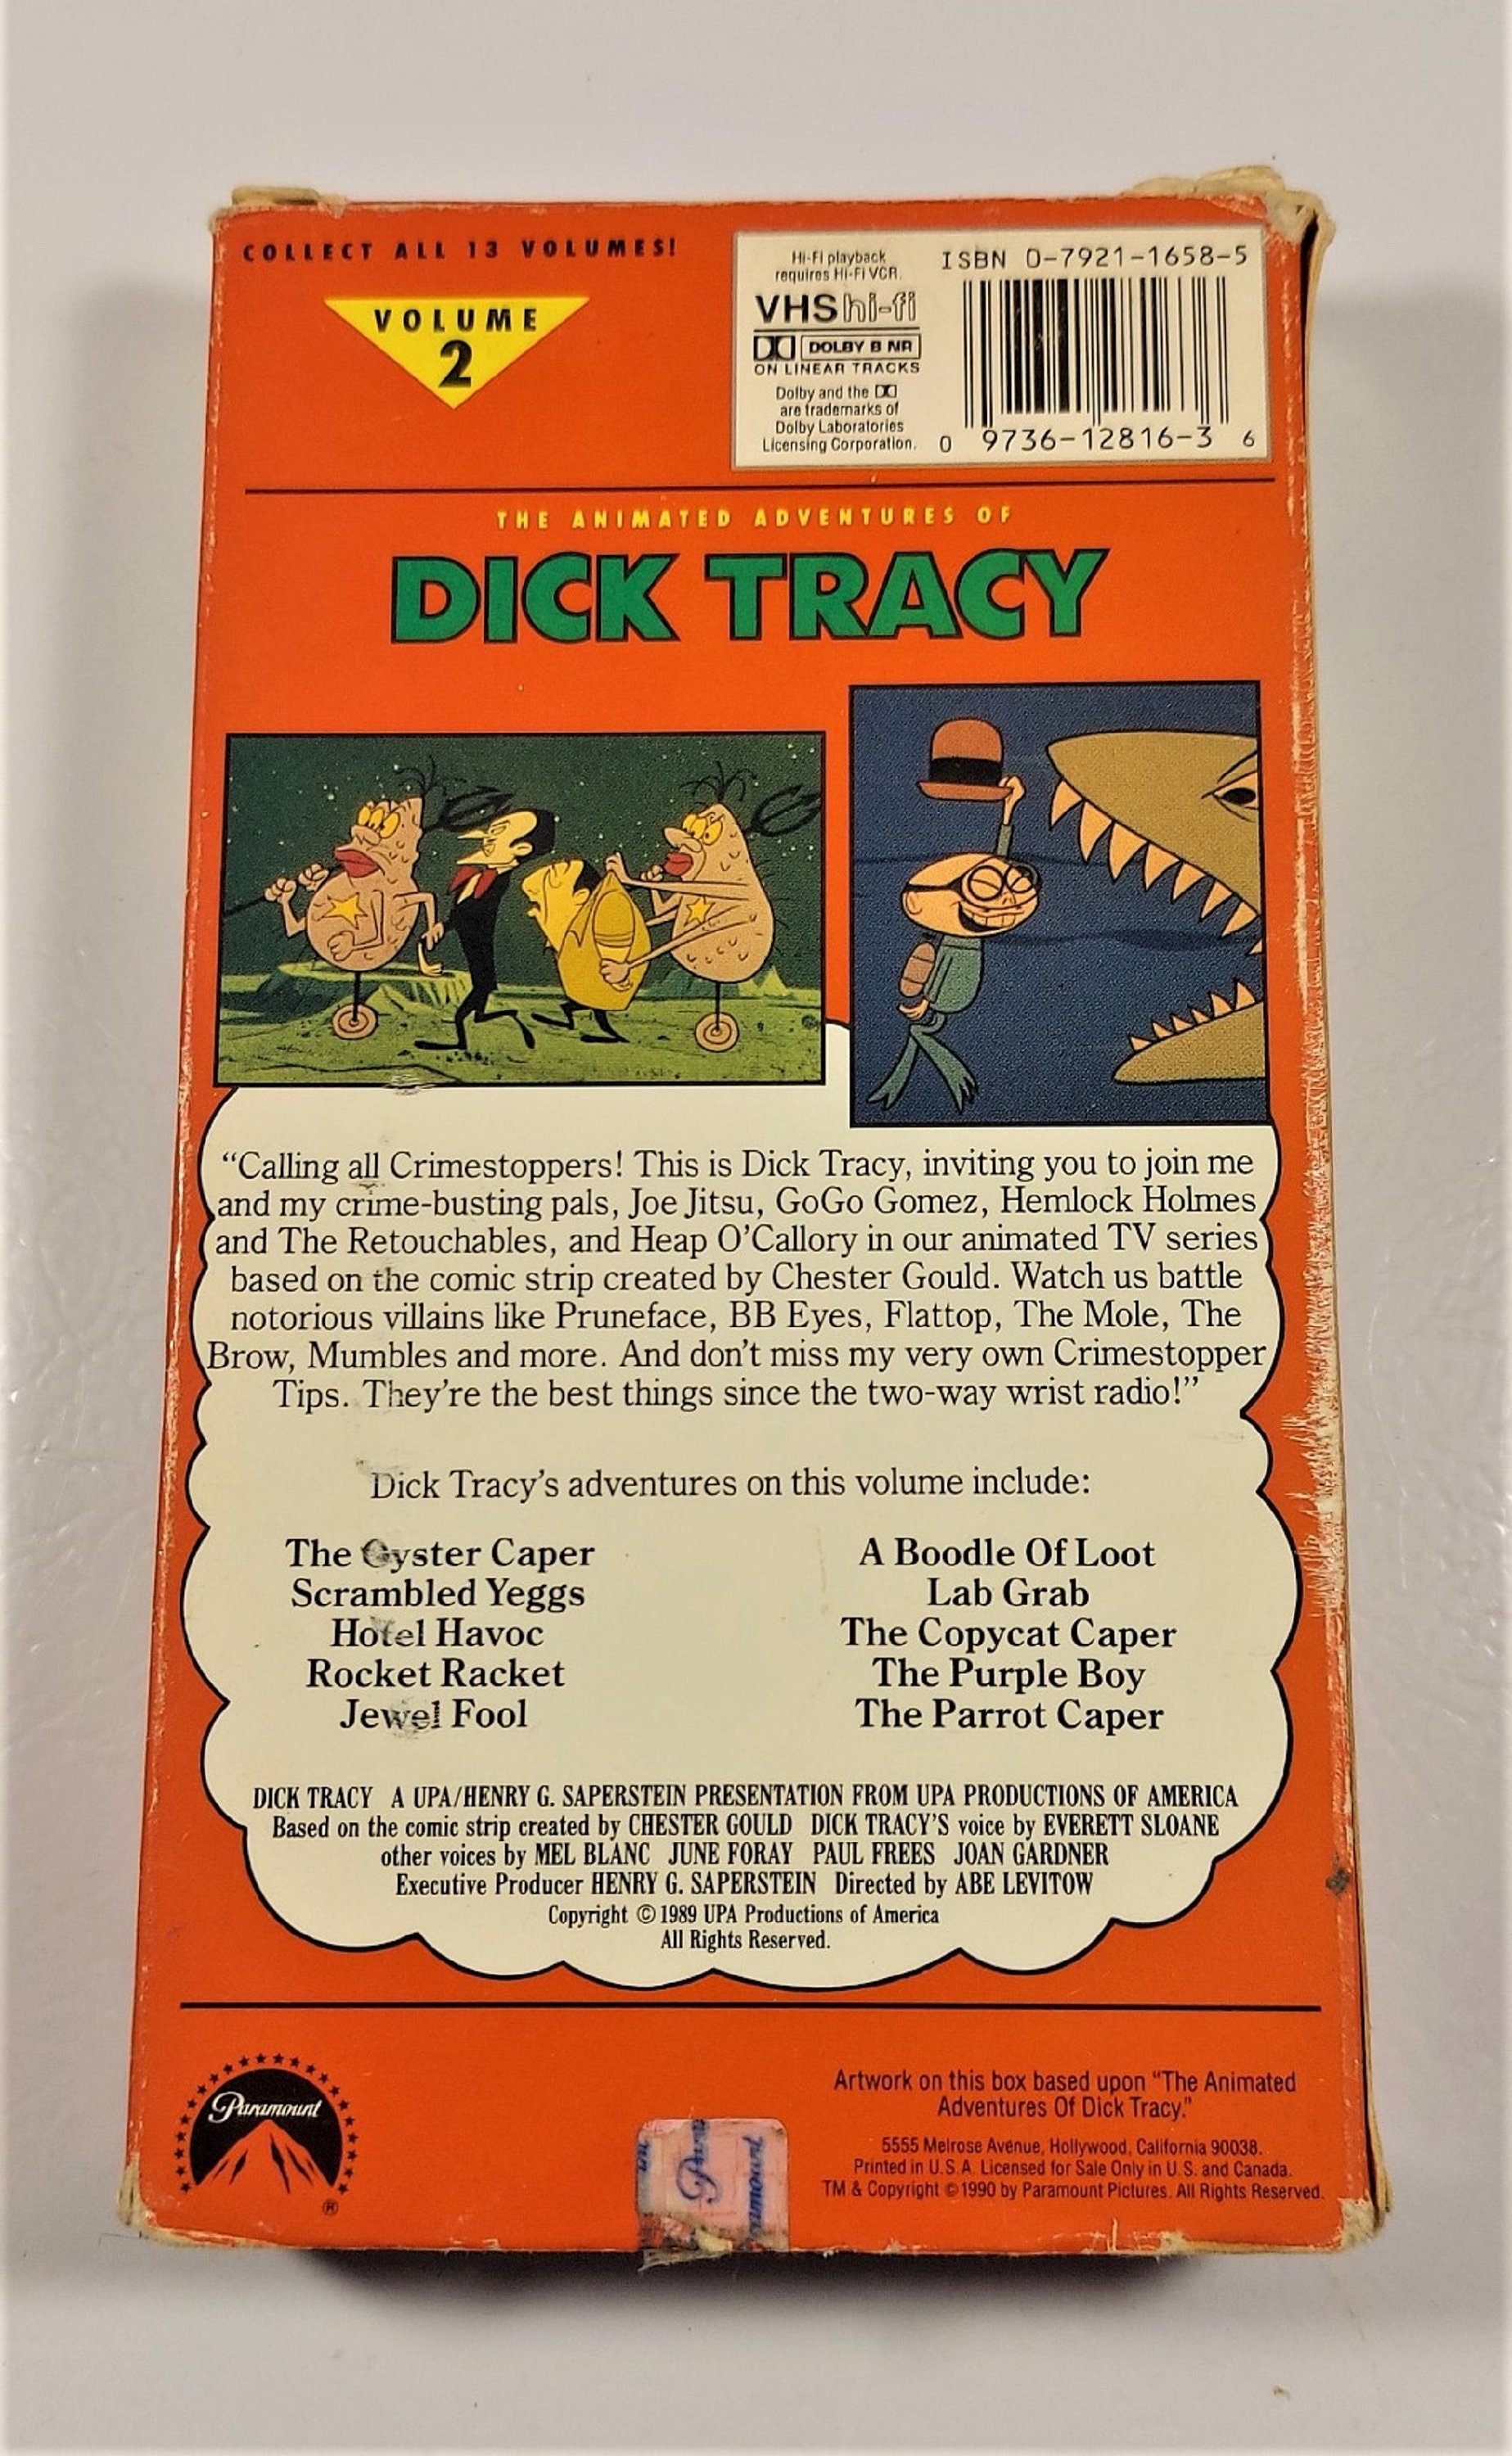 The Animated Adventures of Dick Tracy photo